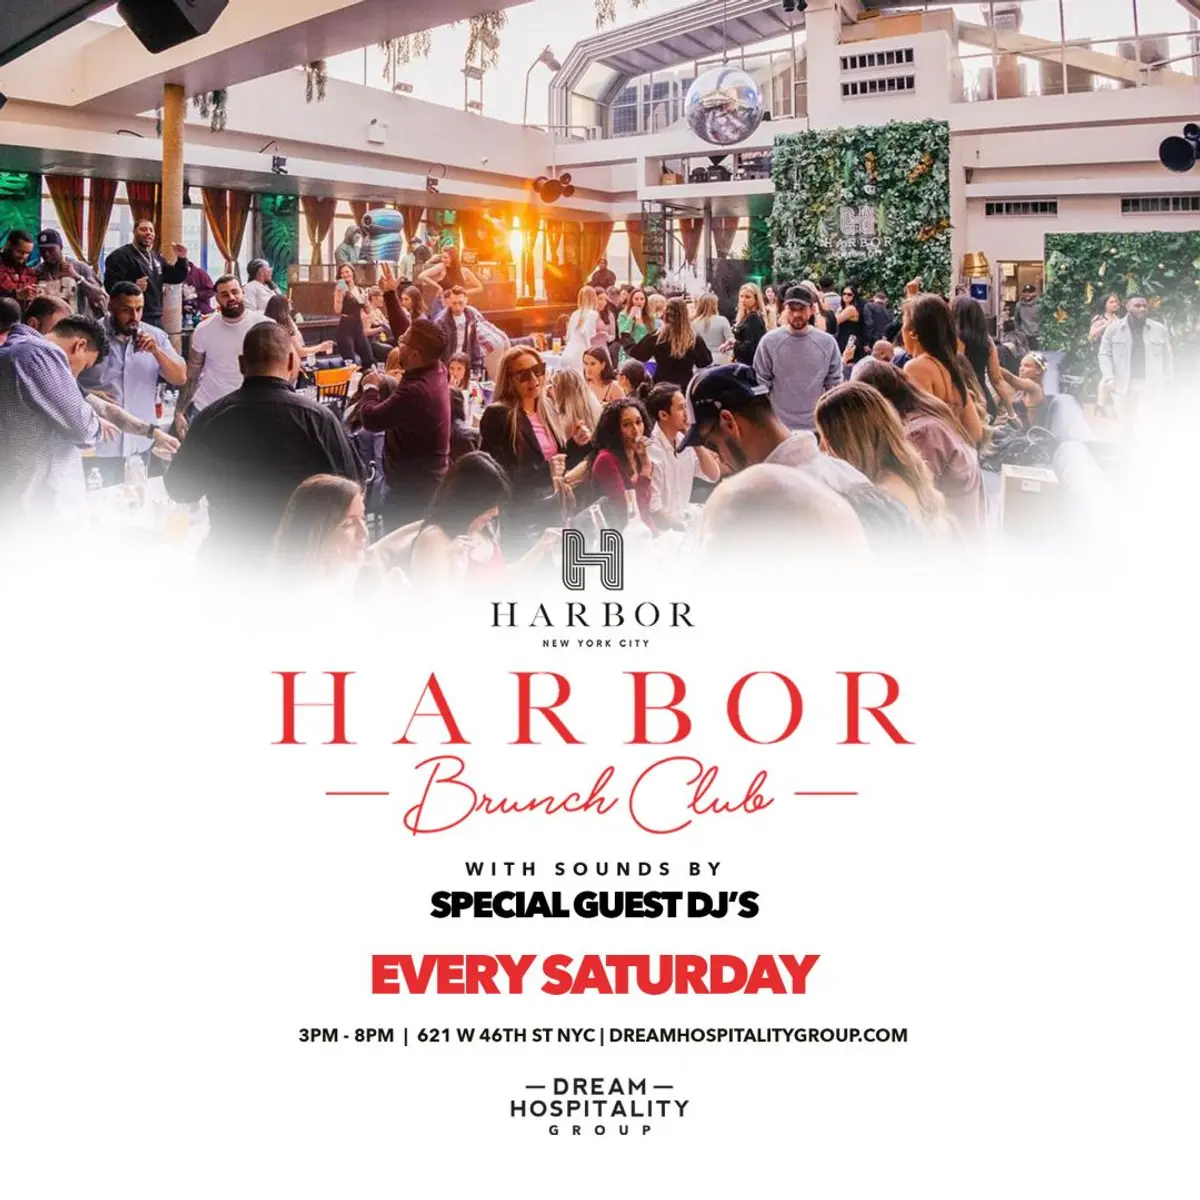 THE VALENTINES DAY WEEKEND BRUNCH @ HARBOR NYC!